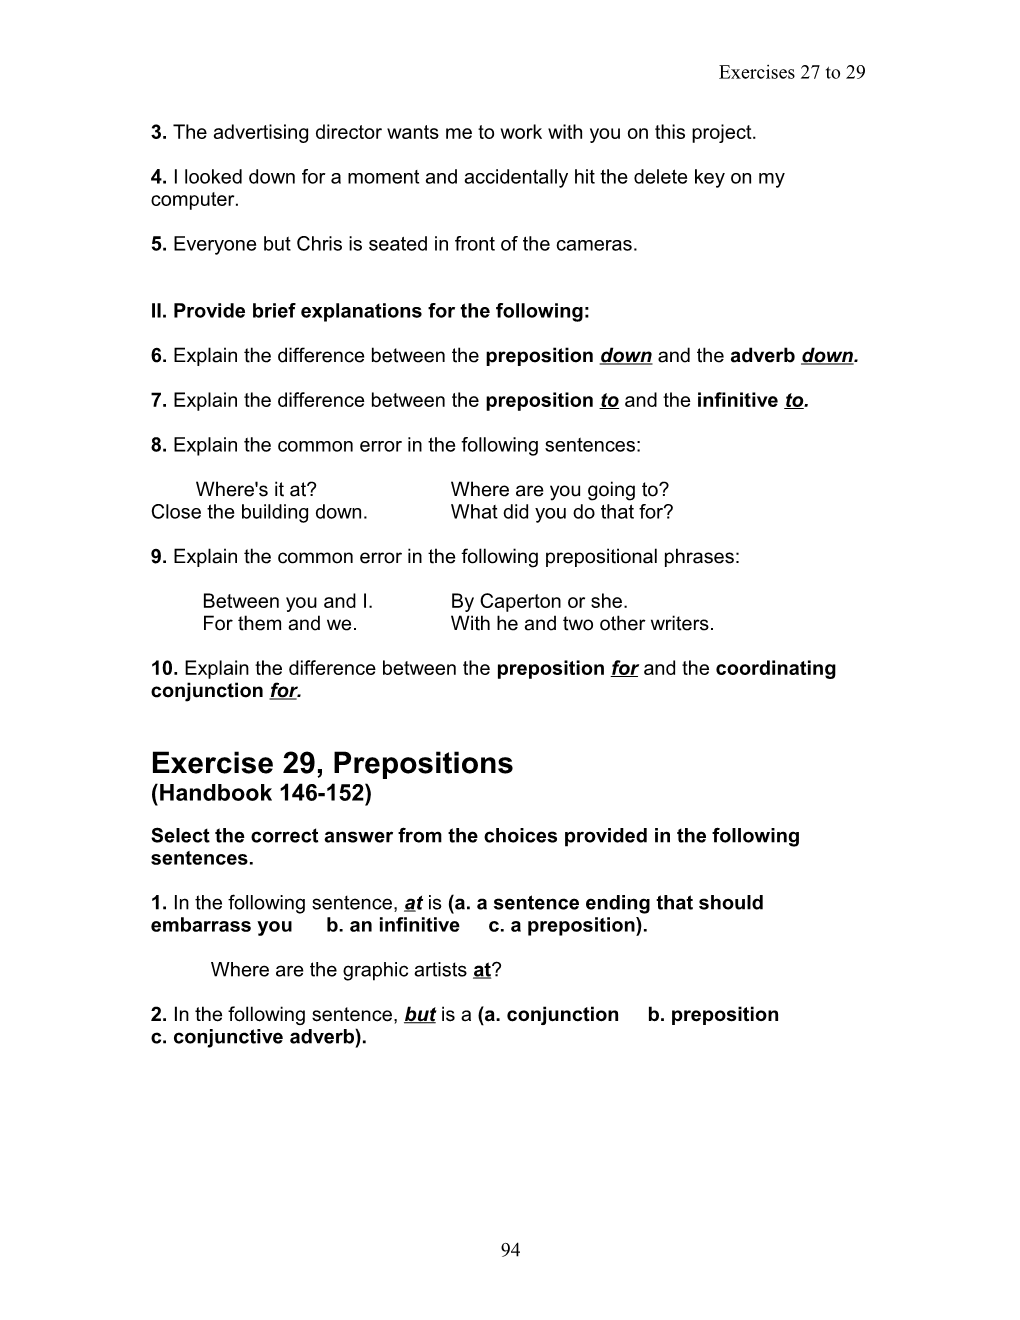 Exercise 27, Chapter 15, Prepositions